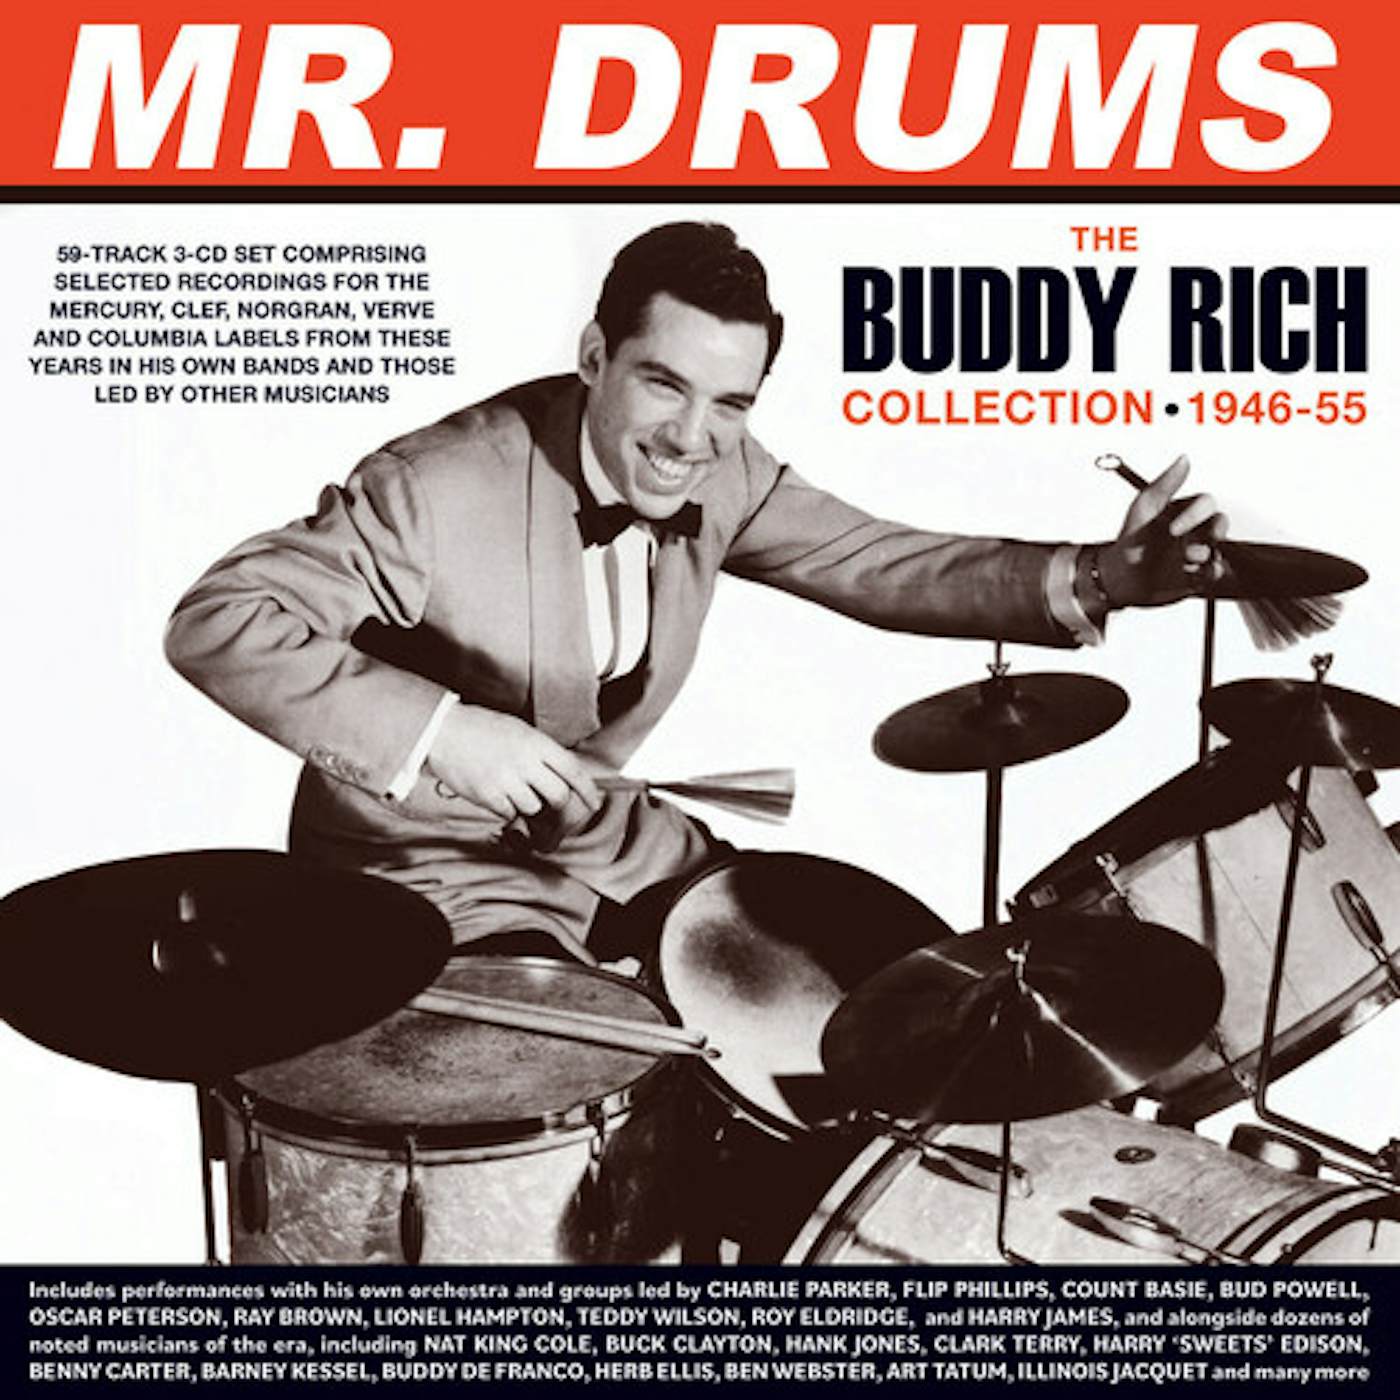 MR. DRUMS: THE BUDDY RICH COLLECTION 1946-55 CD